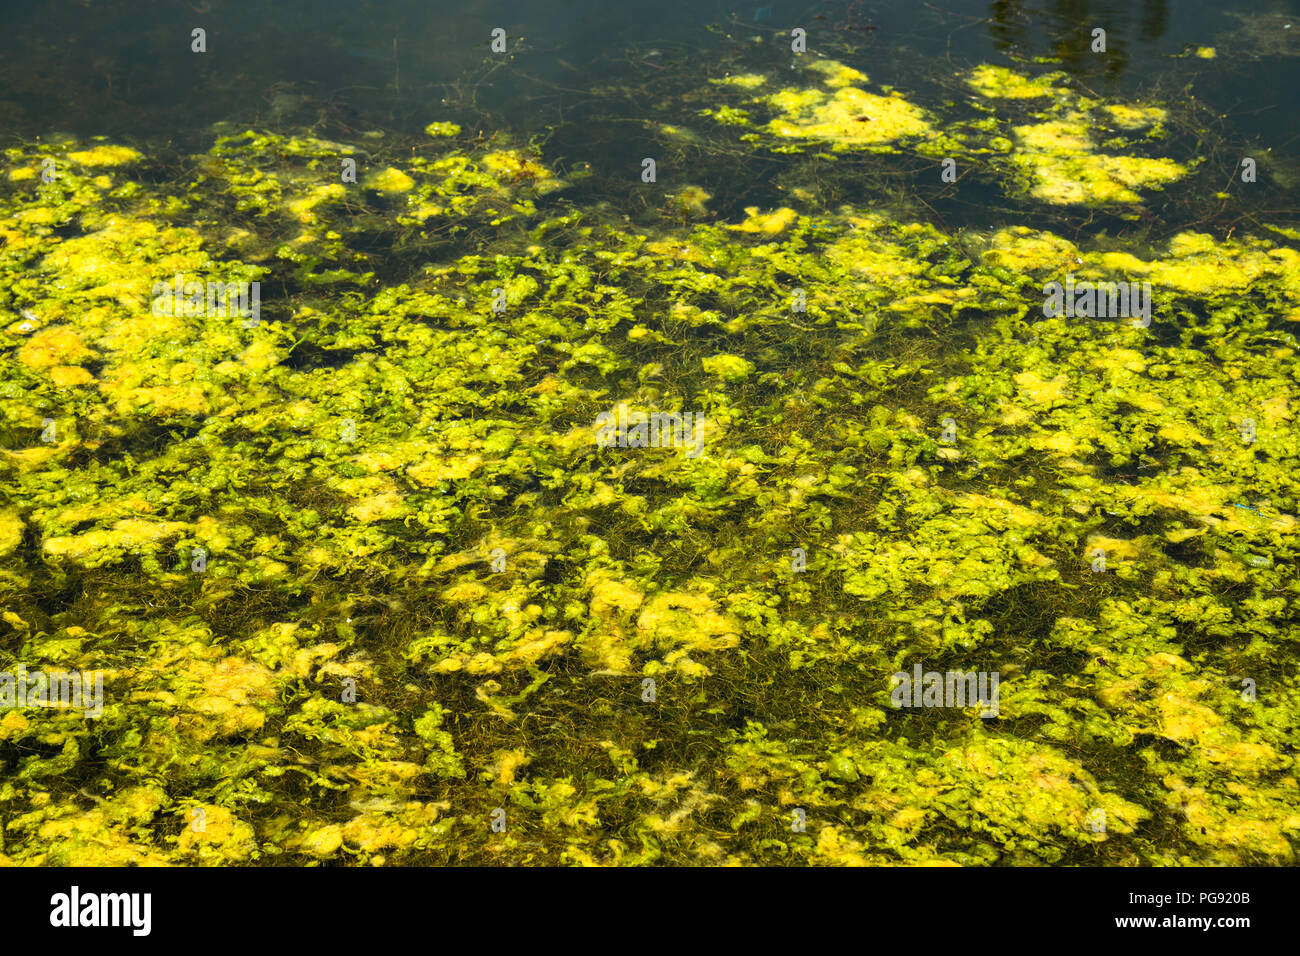 Close up background or texture of weed algae water plant in bright green colour Stock Photo